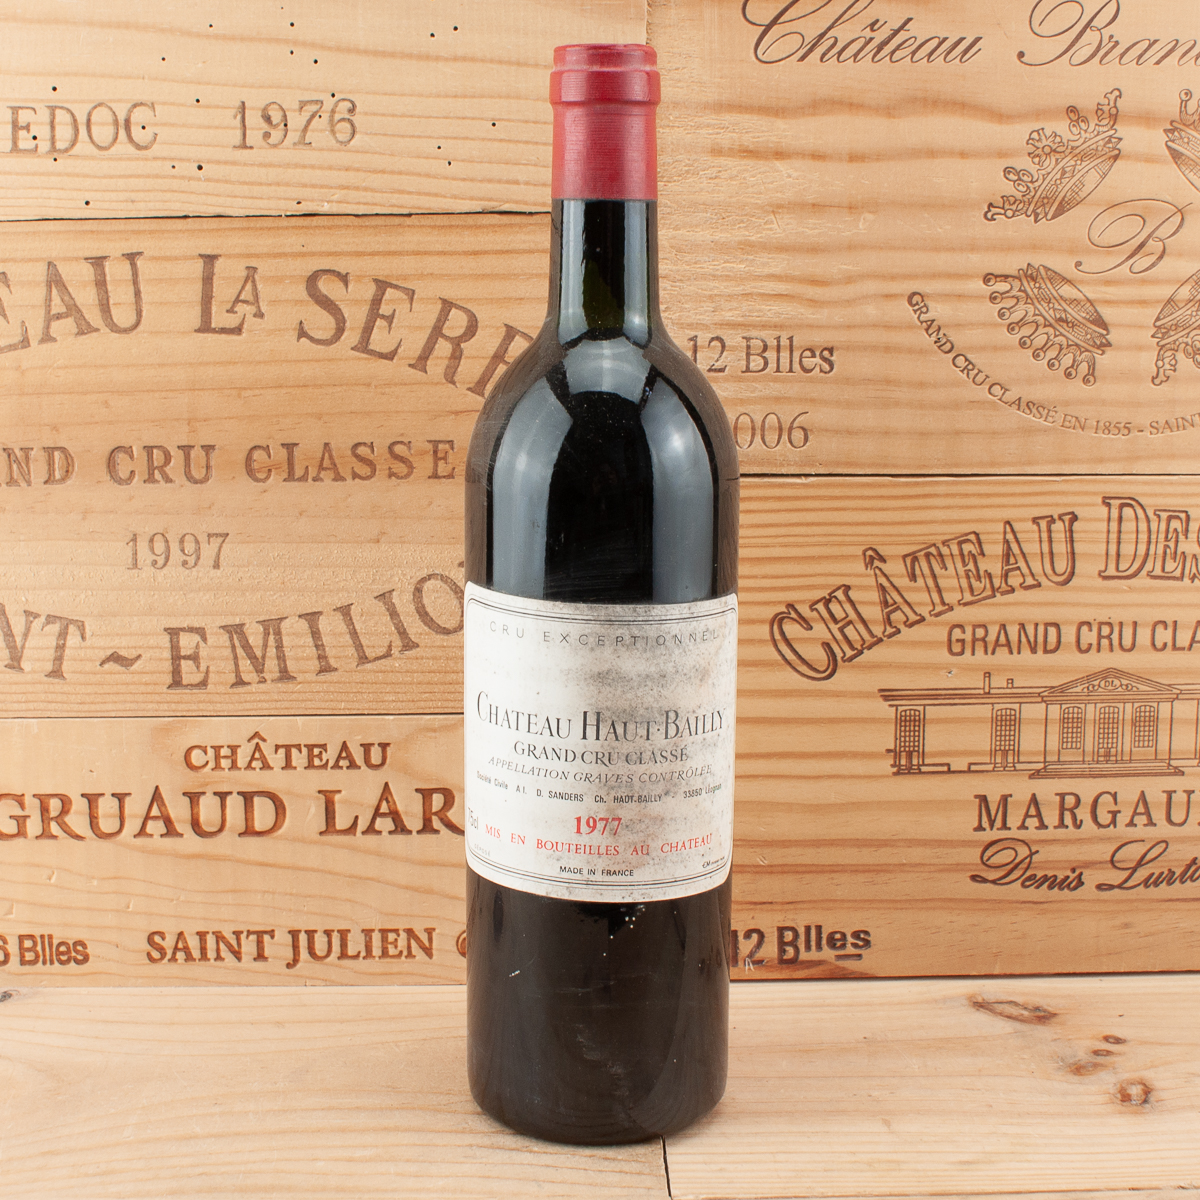 1977 Chateau Haut Bailly